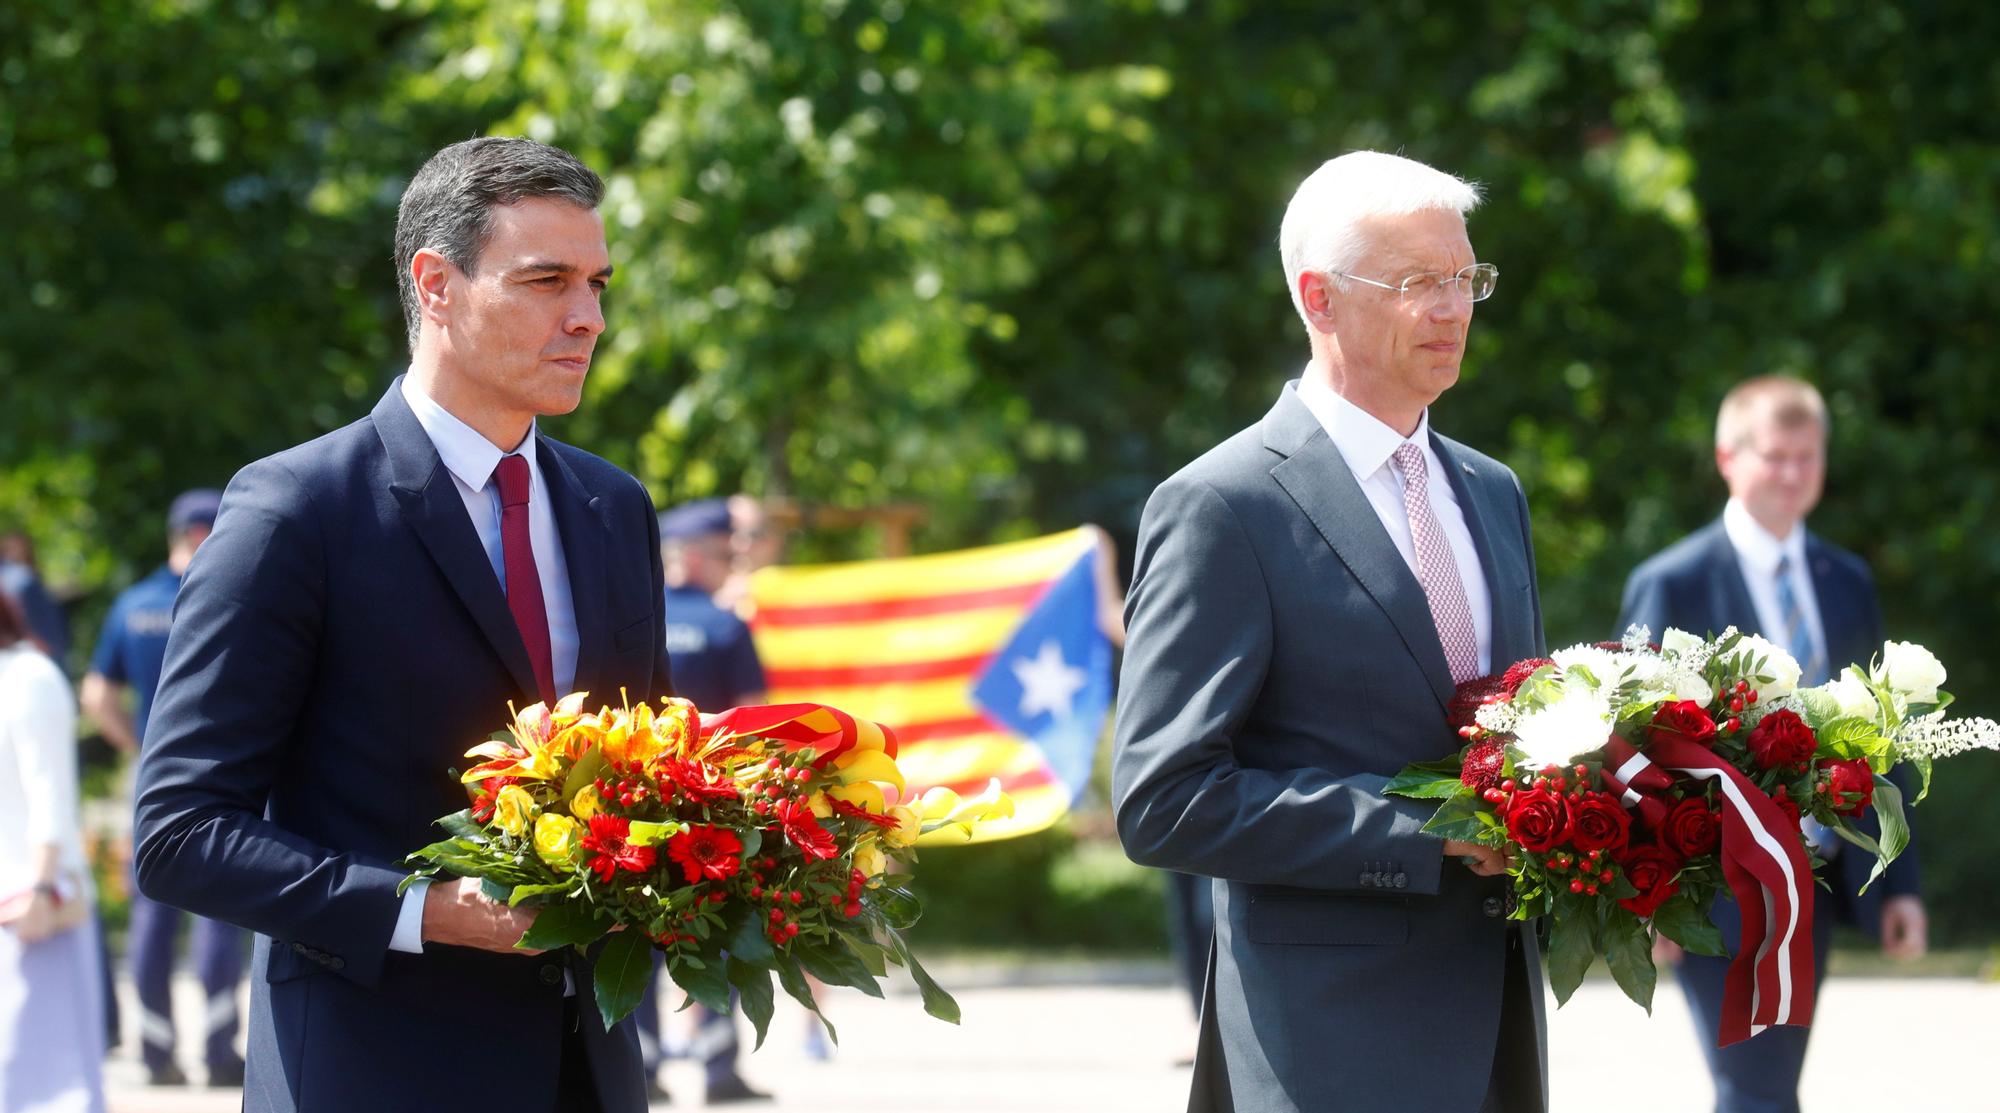 Spanish PM Sanchez and Latvian PM Karins attend flower ceremony at the Freedoms monument in Riga